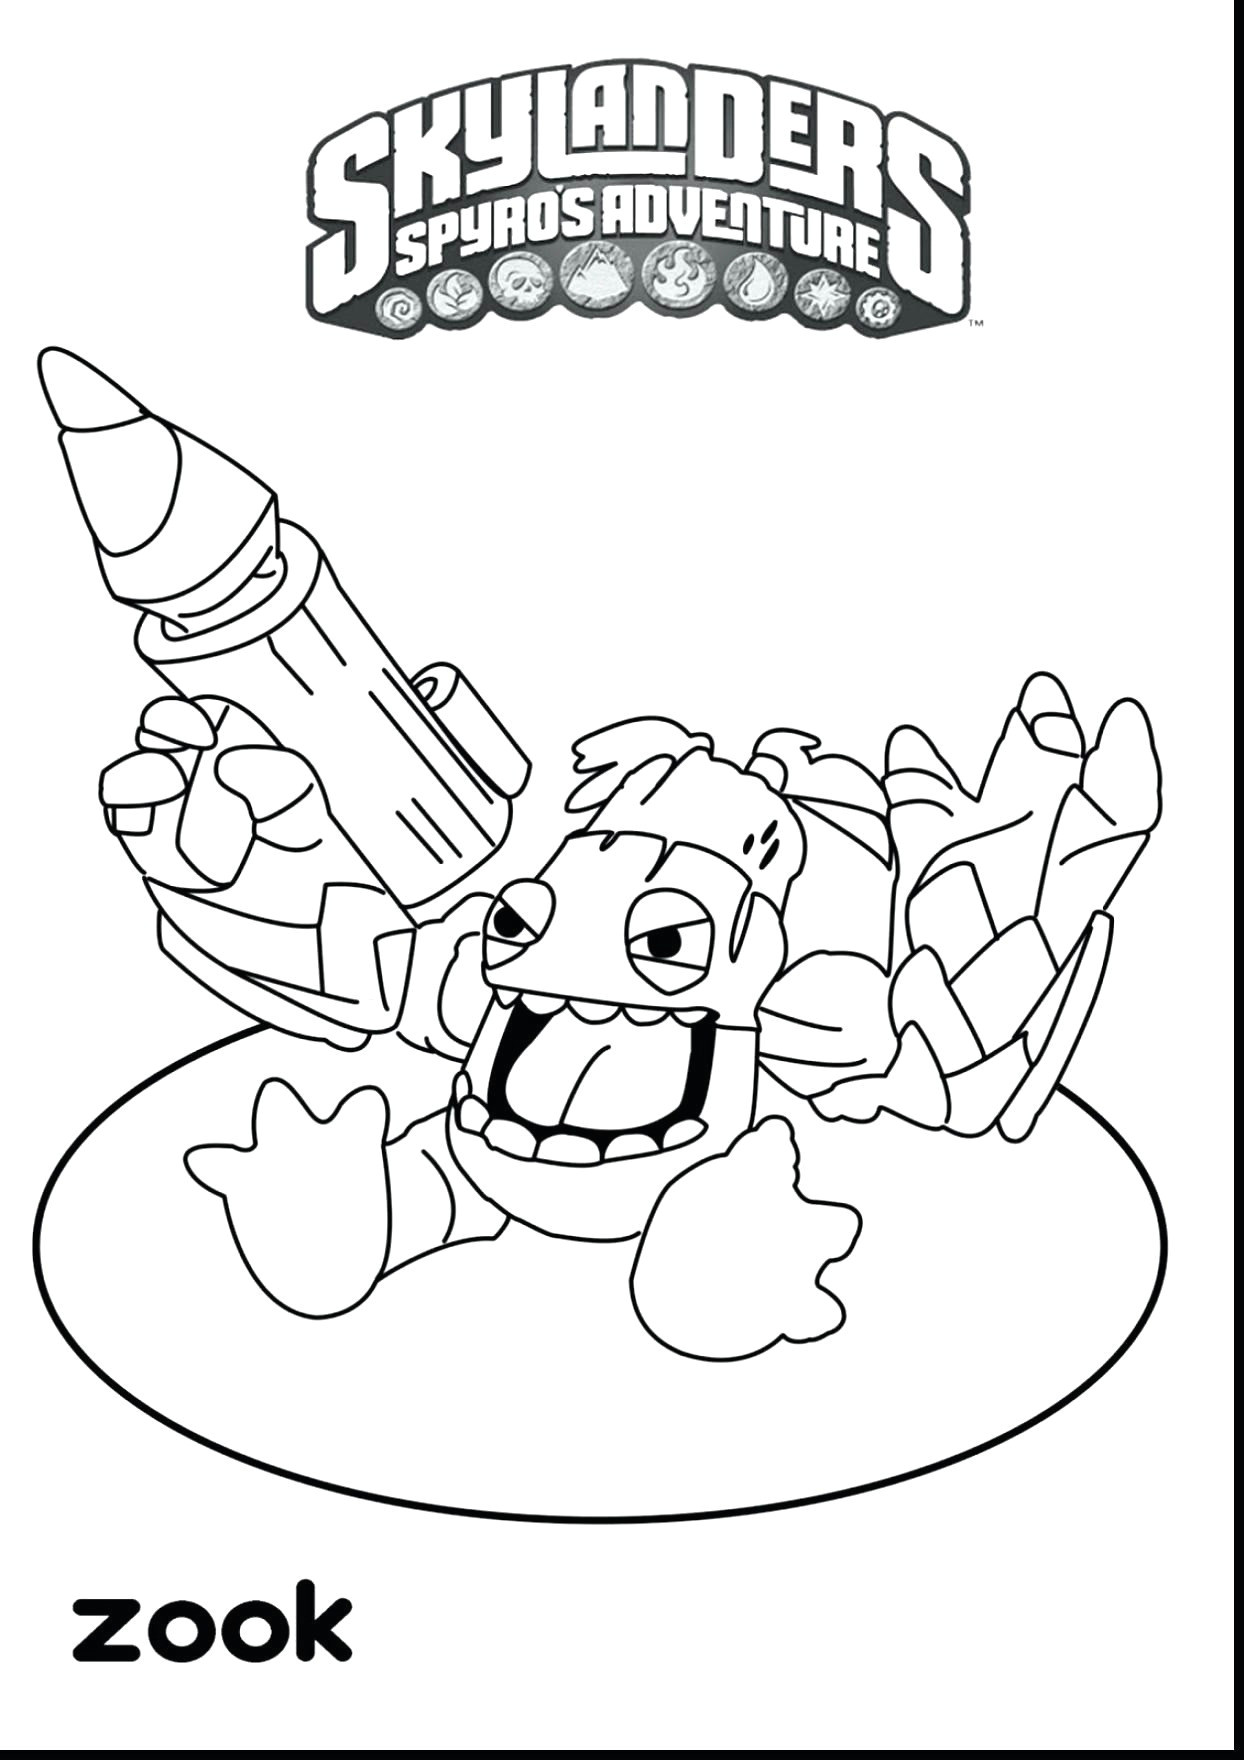 Drawing Cartoon Websites Www Colouring Pages Brilliant Easy to Draw Instruments Home Coloring